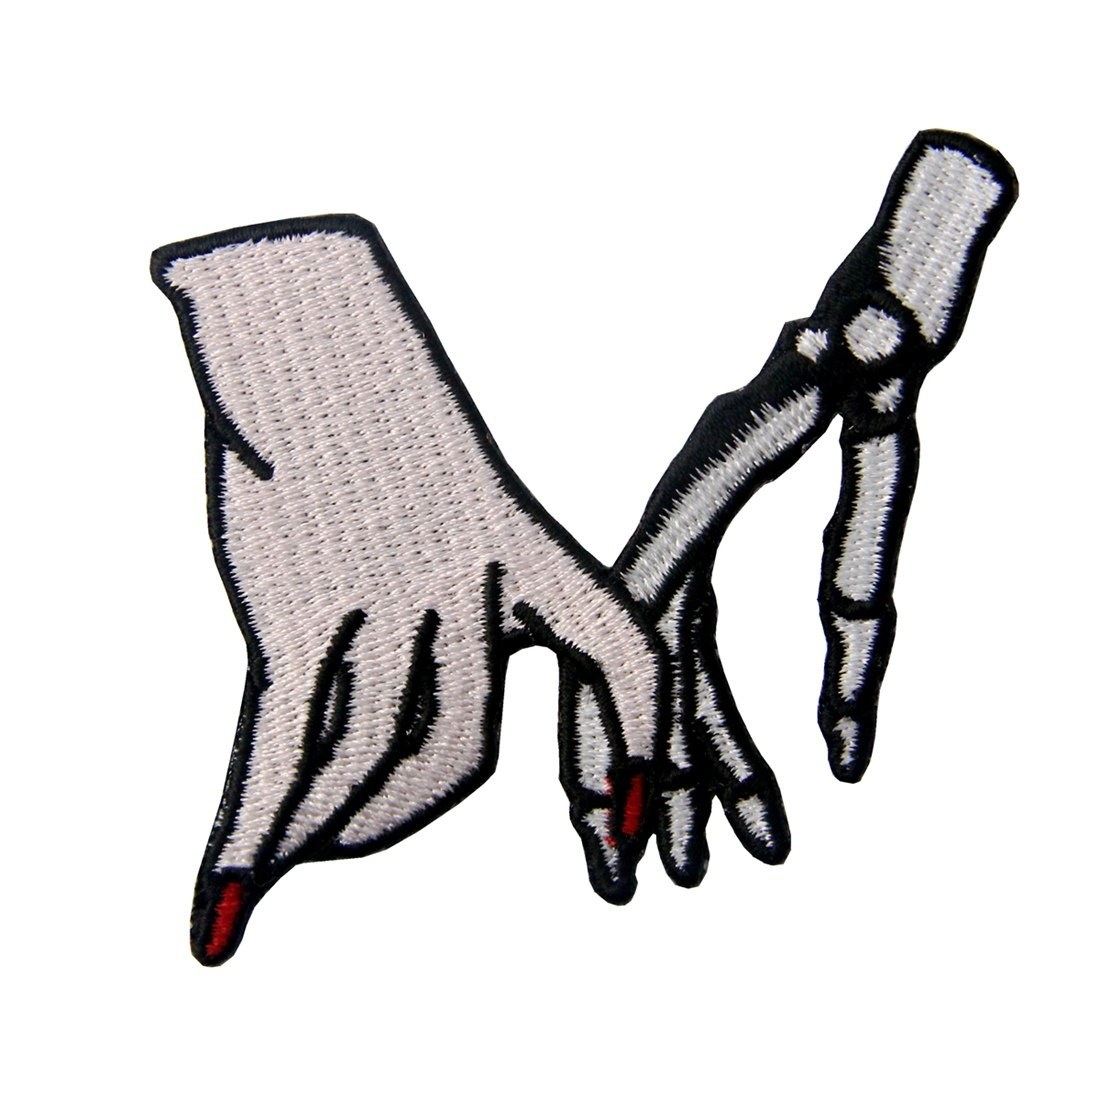 A patch with a cartoon-like human hand wearing red nail polish and a in a skeleton hand holding pinkies.